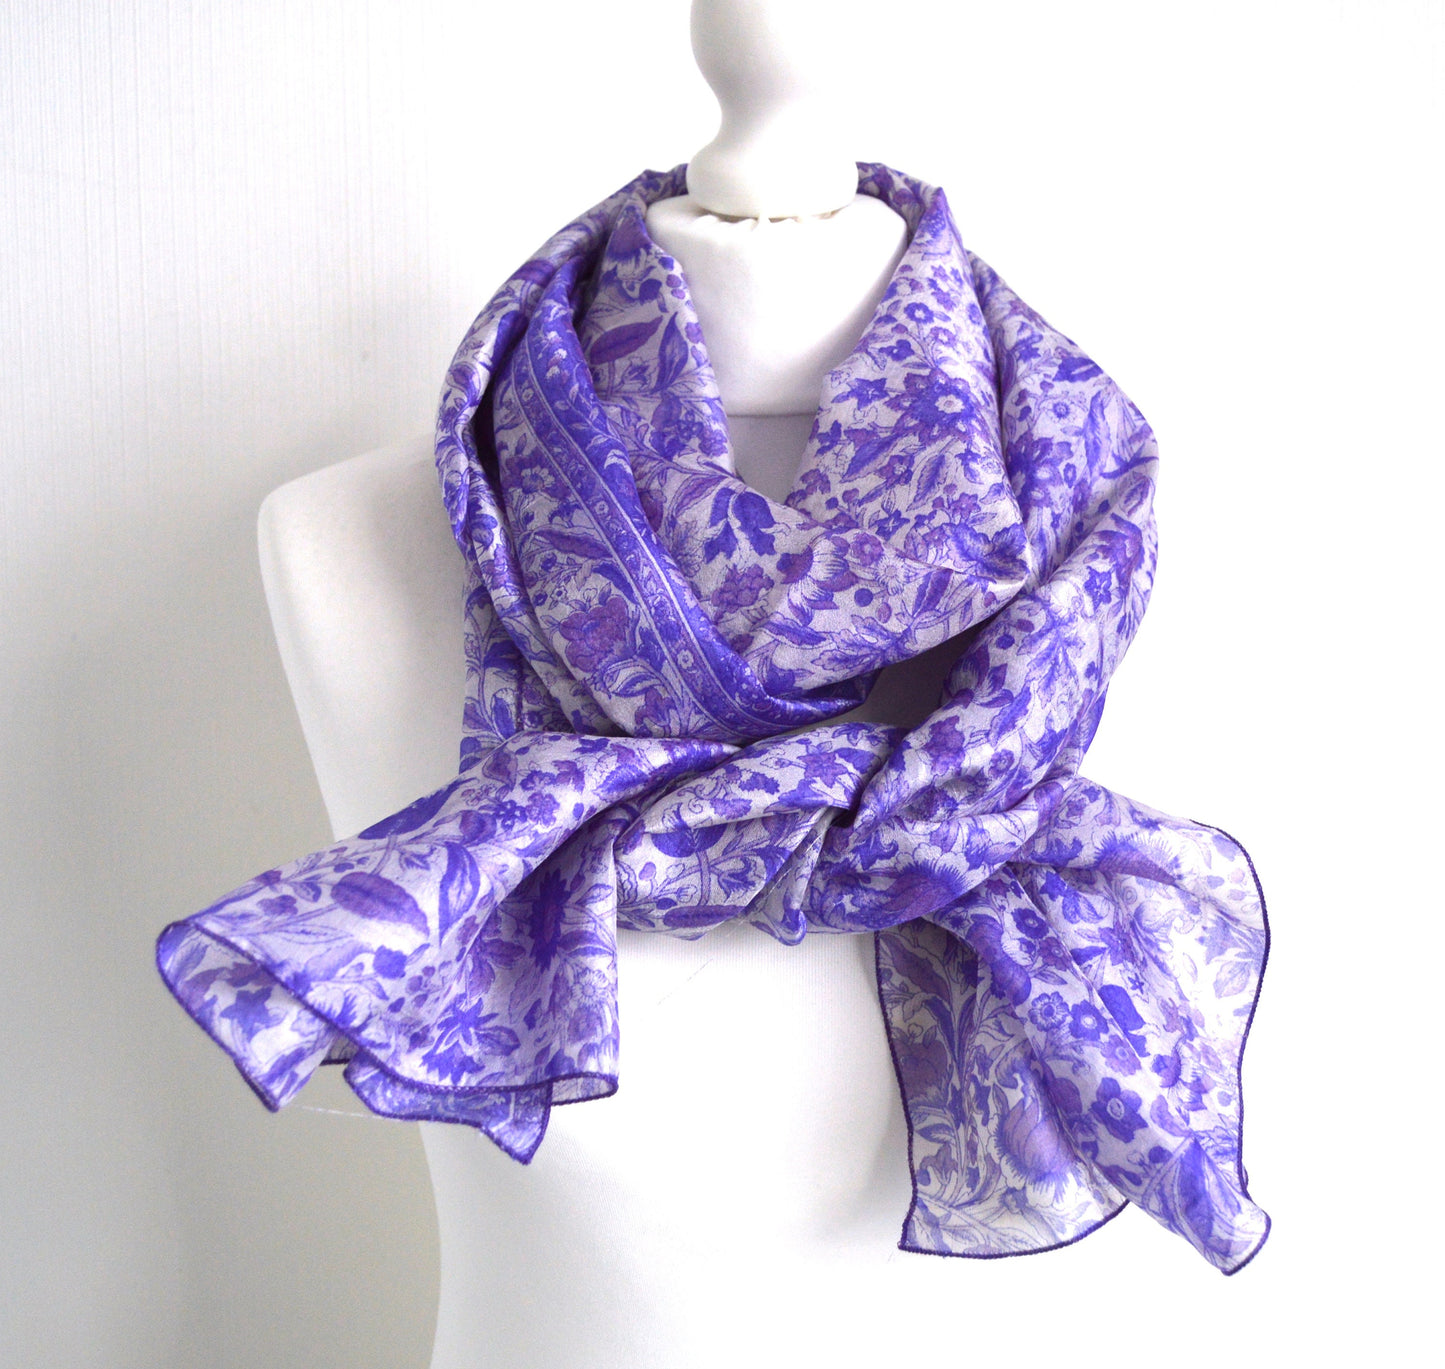 Purple Floral Upcycled Vintage Sari Silk Scarf - Eco Friendly Boho Baby Shower Gift for Her - Ethical Zero Waste Womens Scarf